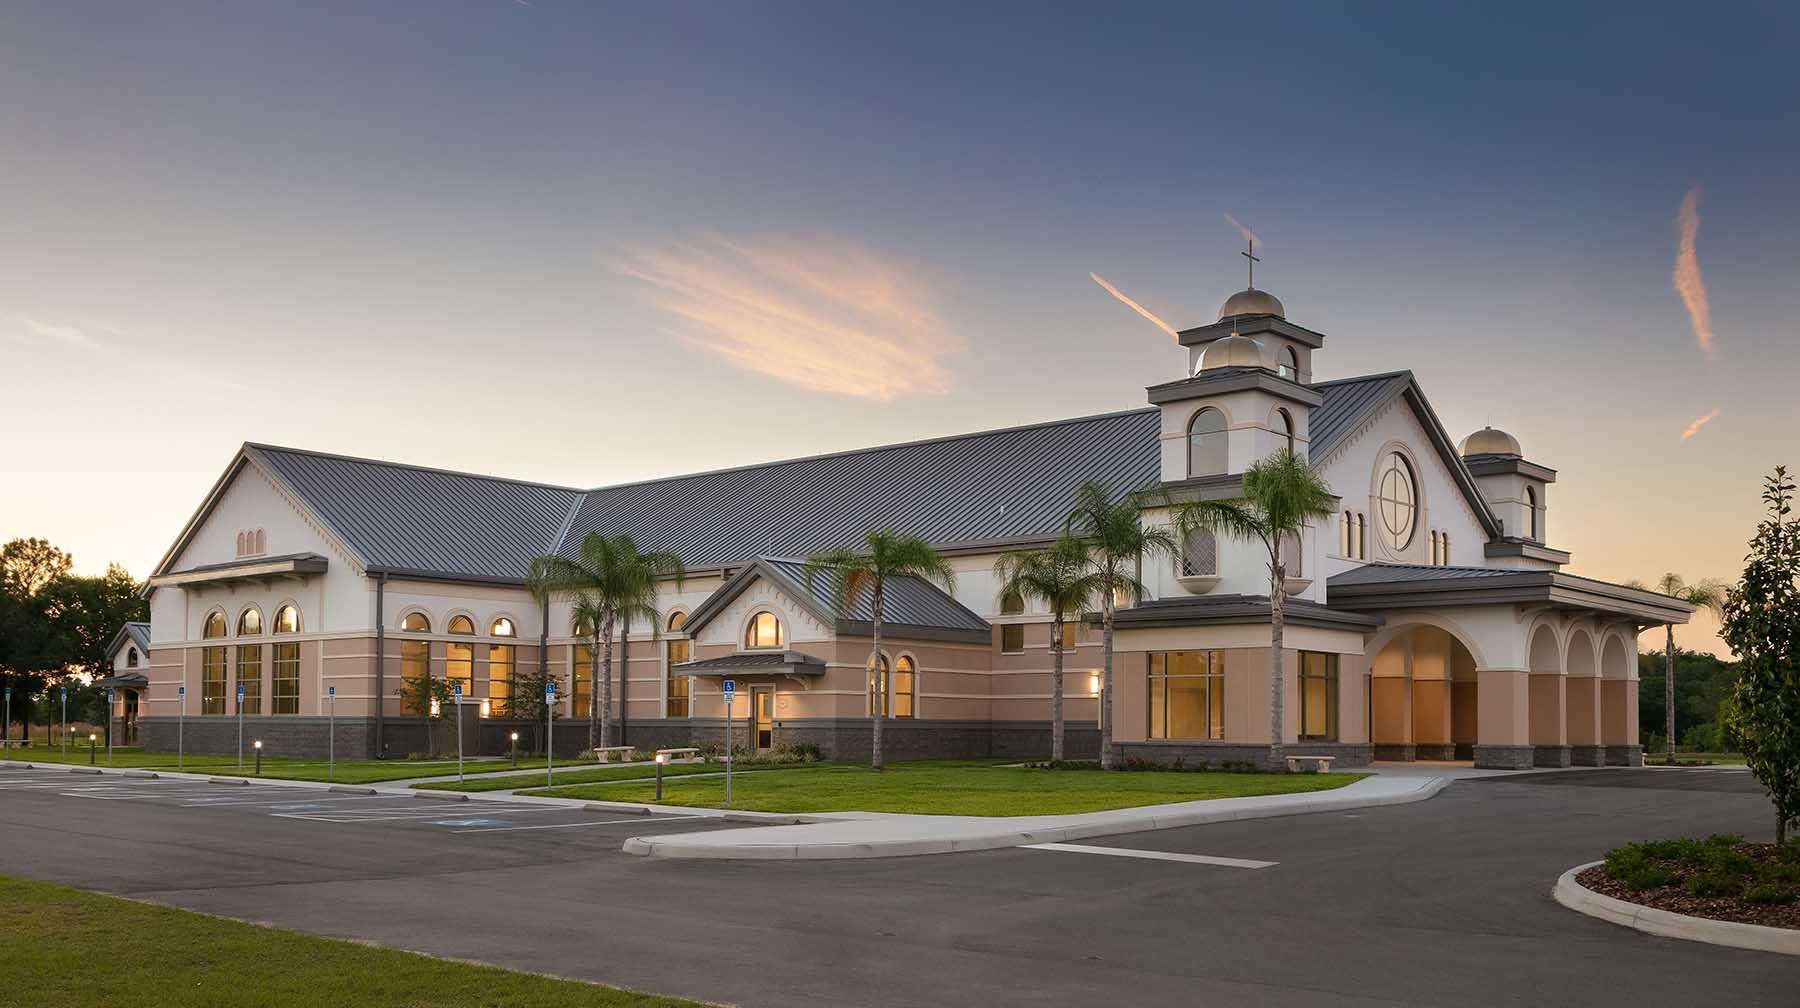 The Diocese of Venice in Florida and Our Lady of the Angels Catholic Church engaged PRA to design this new Catholic church in Lakewood Ranch, Florida